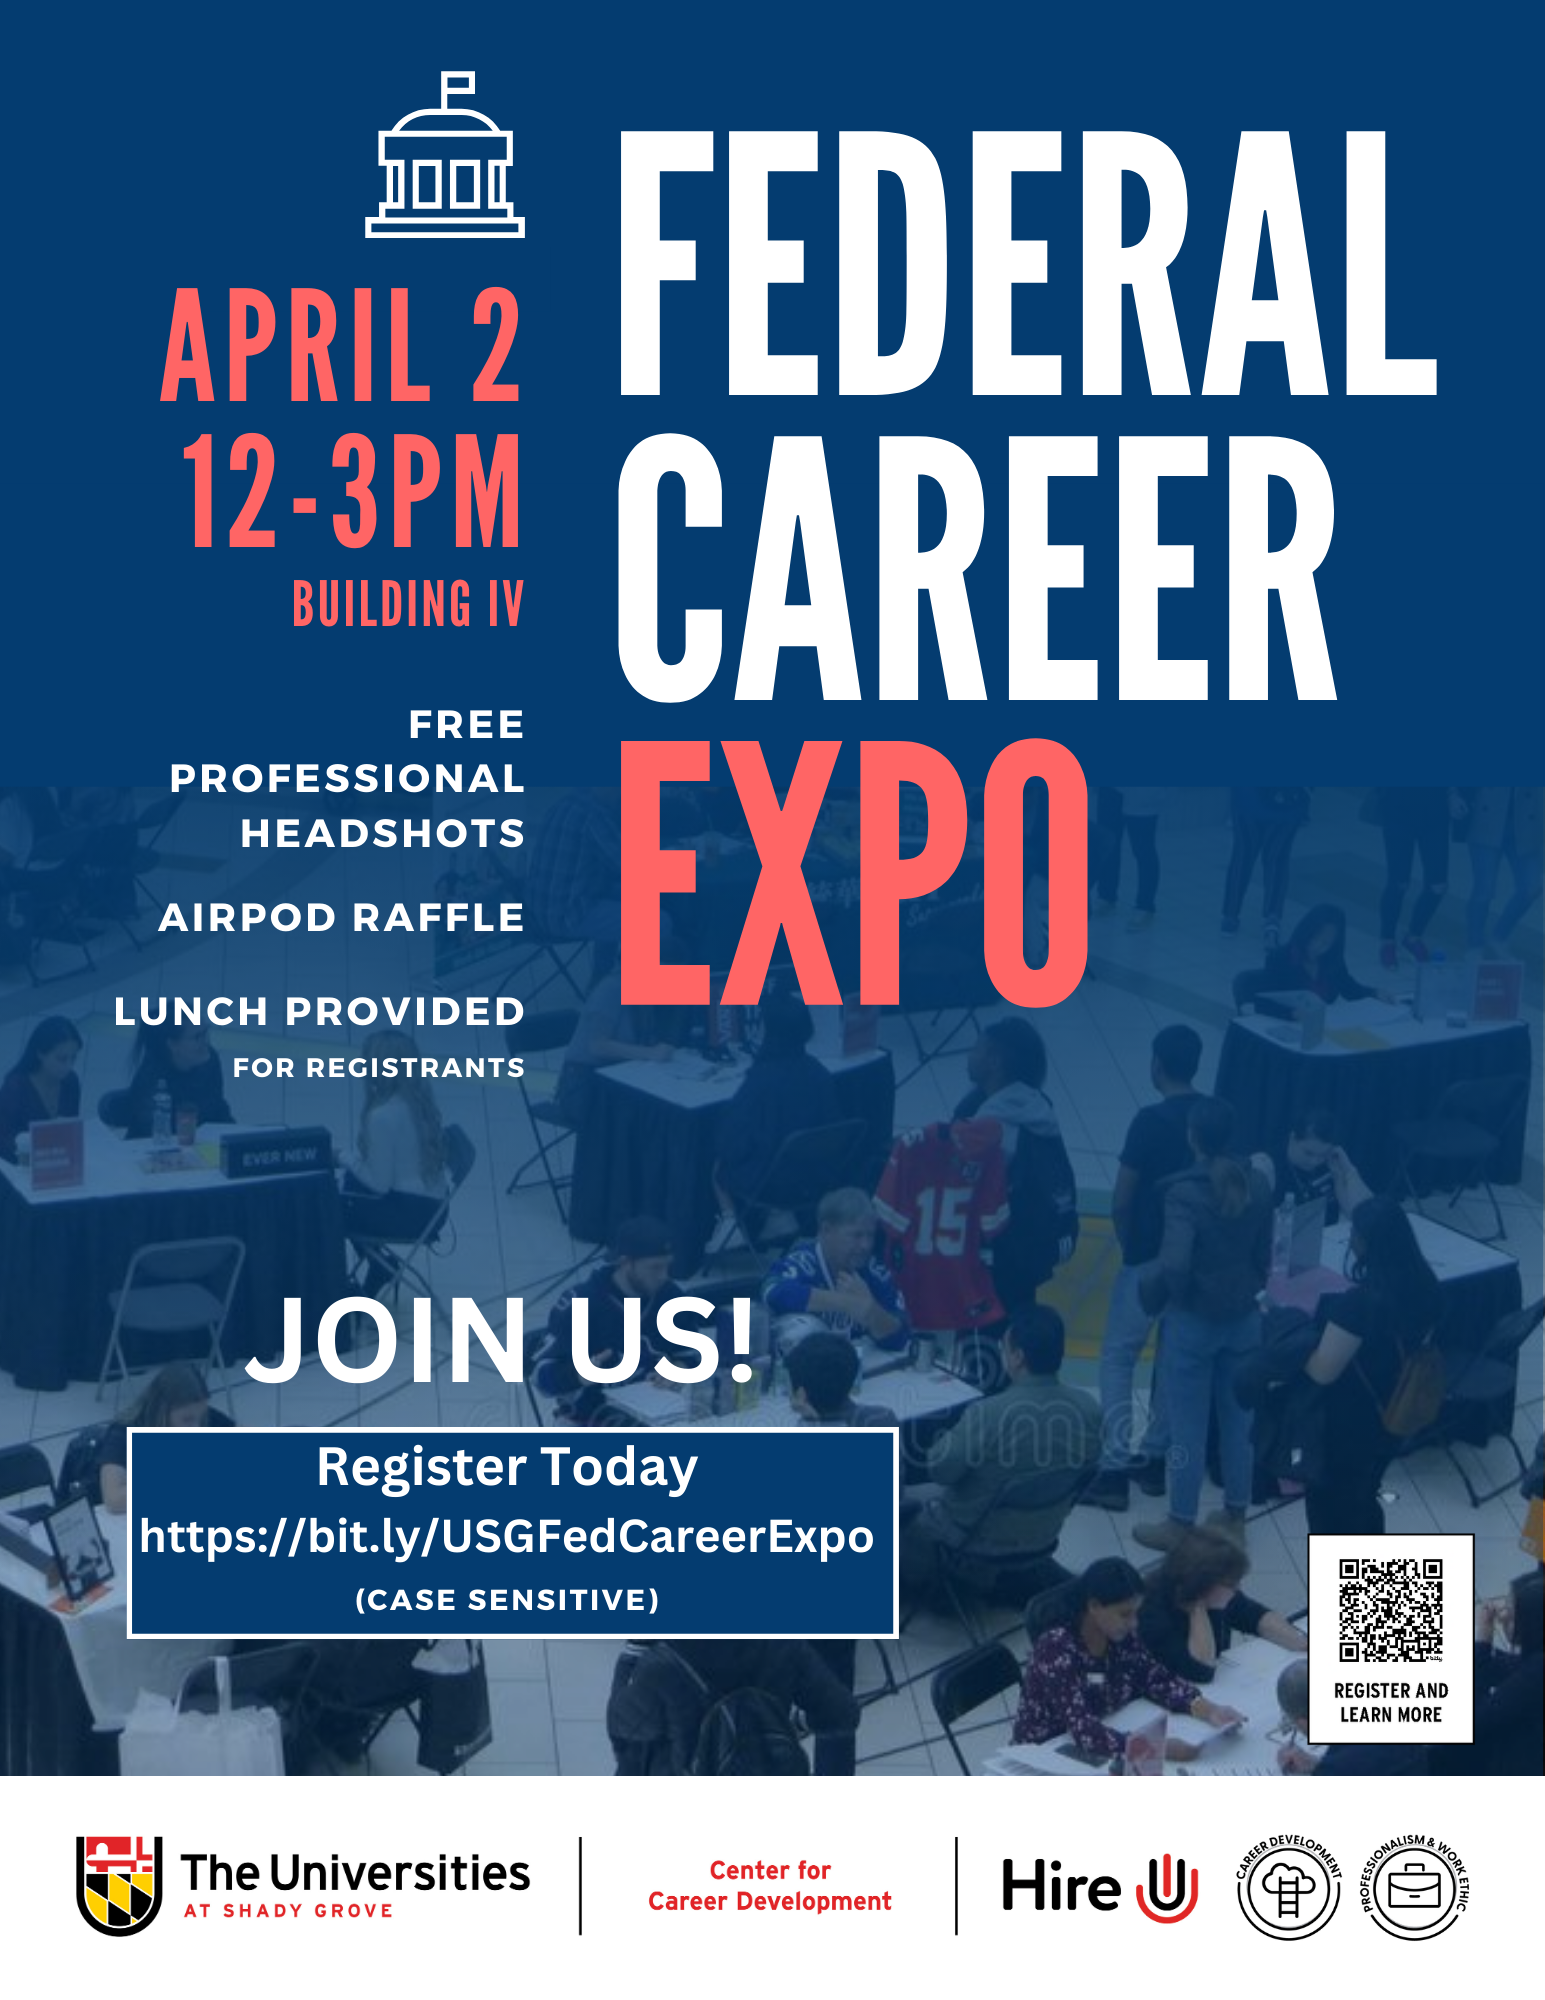 Federal Career Expo Flyer